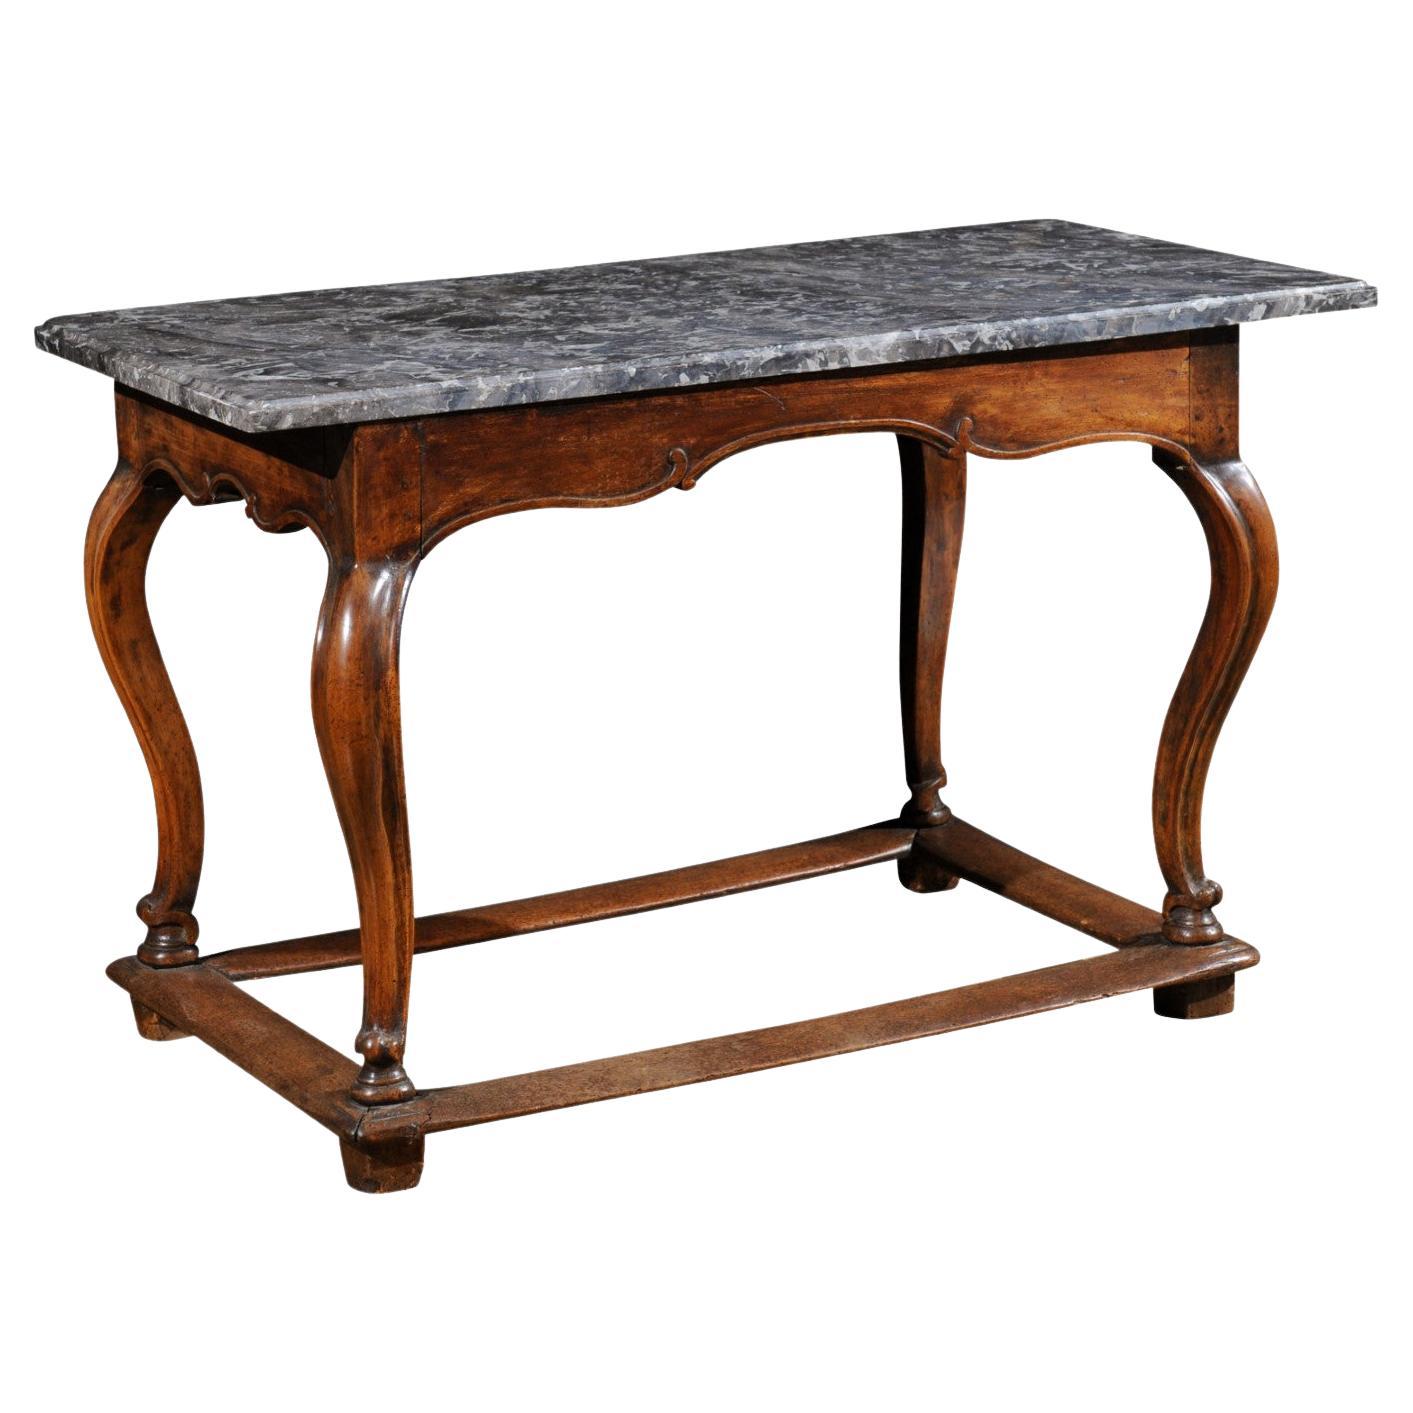 French 18th Century Louis XV Walnut Center Table with Variegated Grey Marble Top